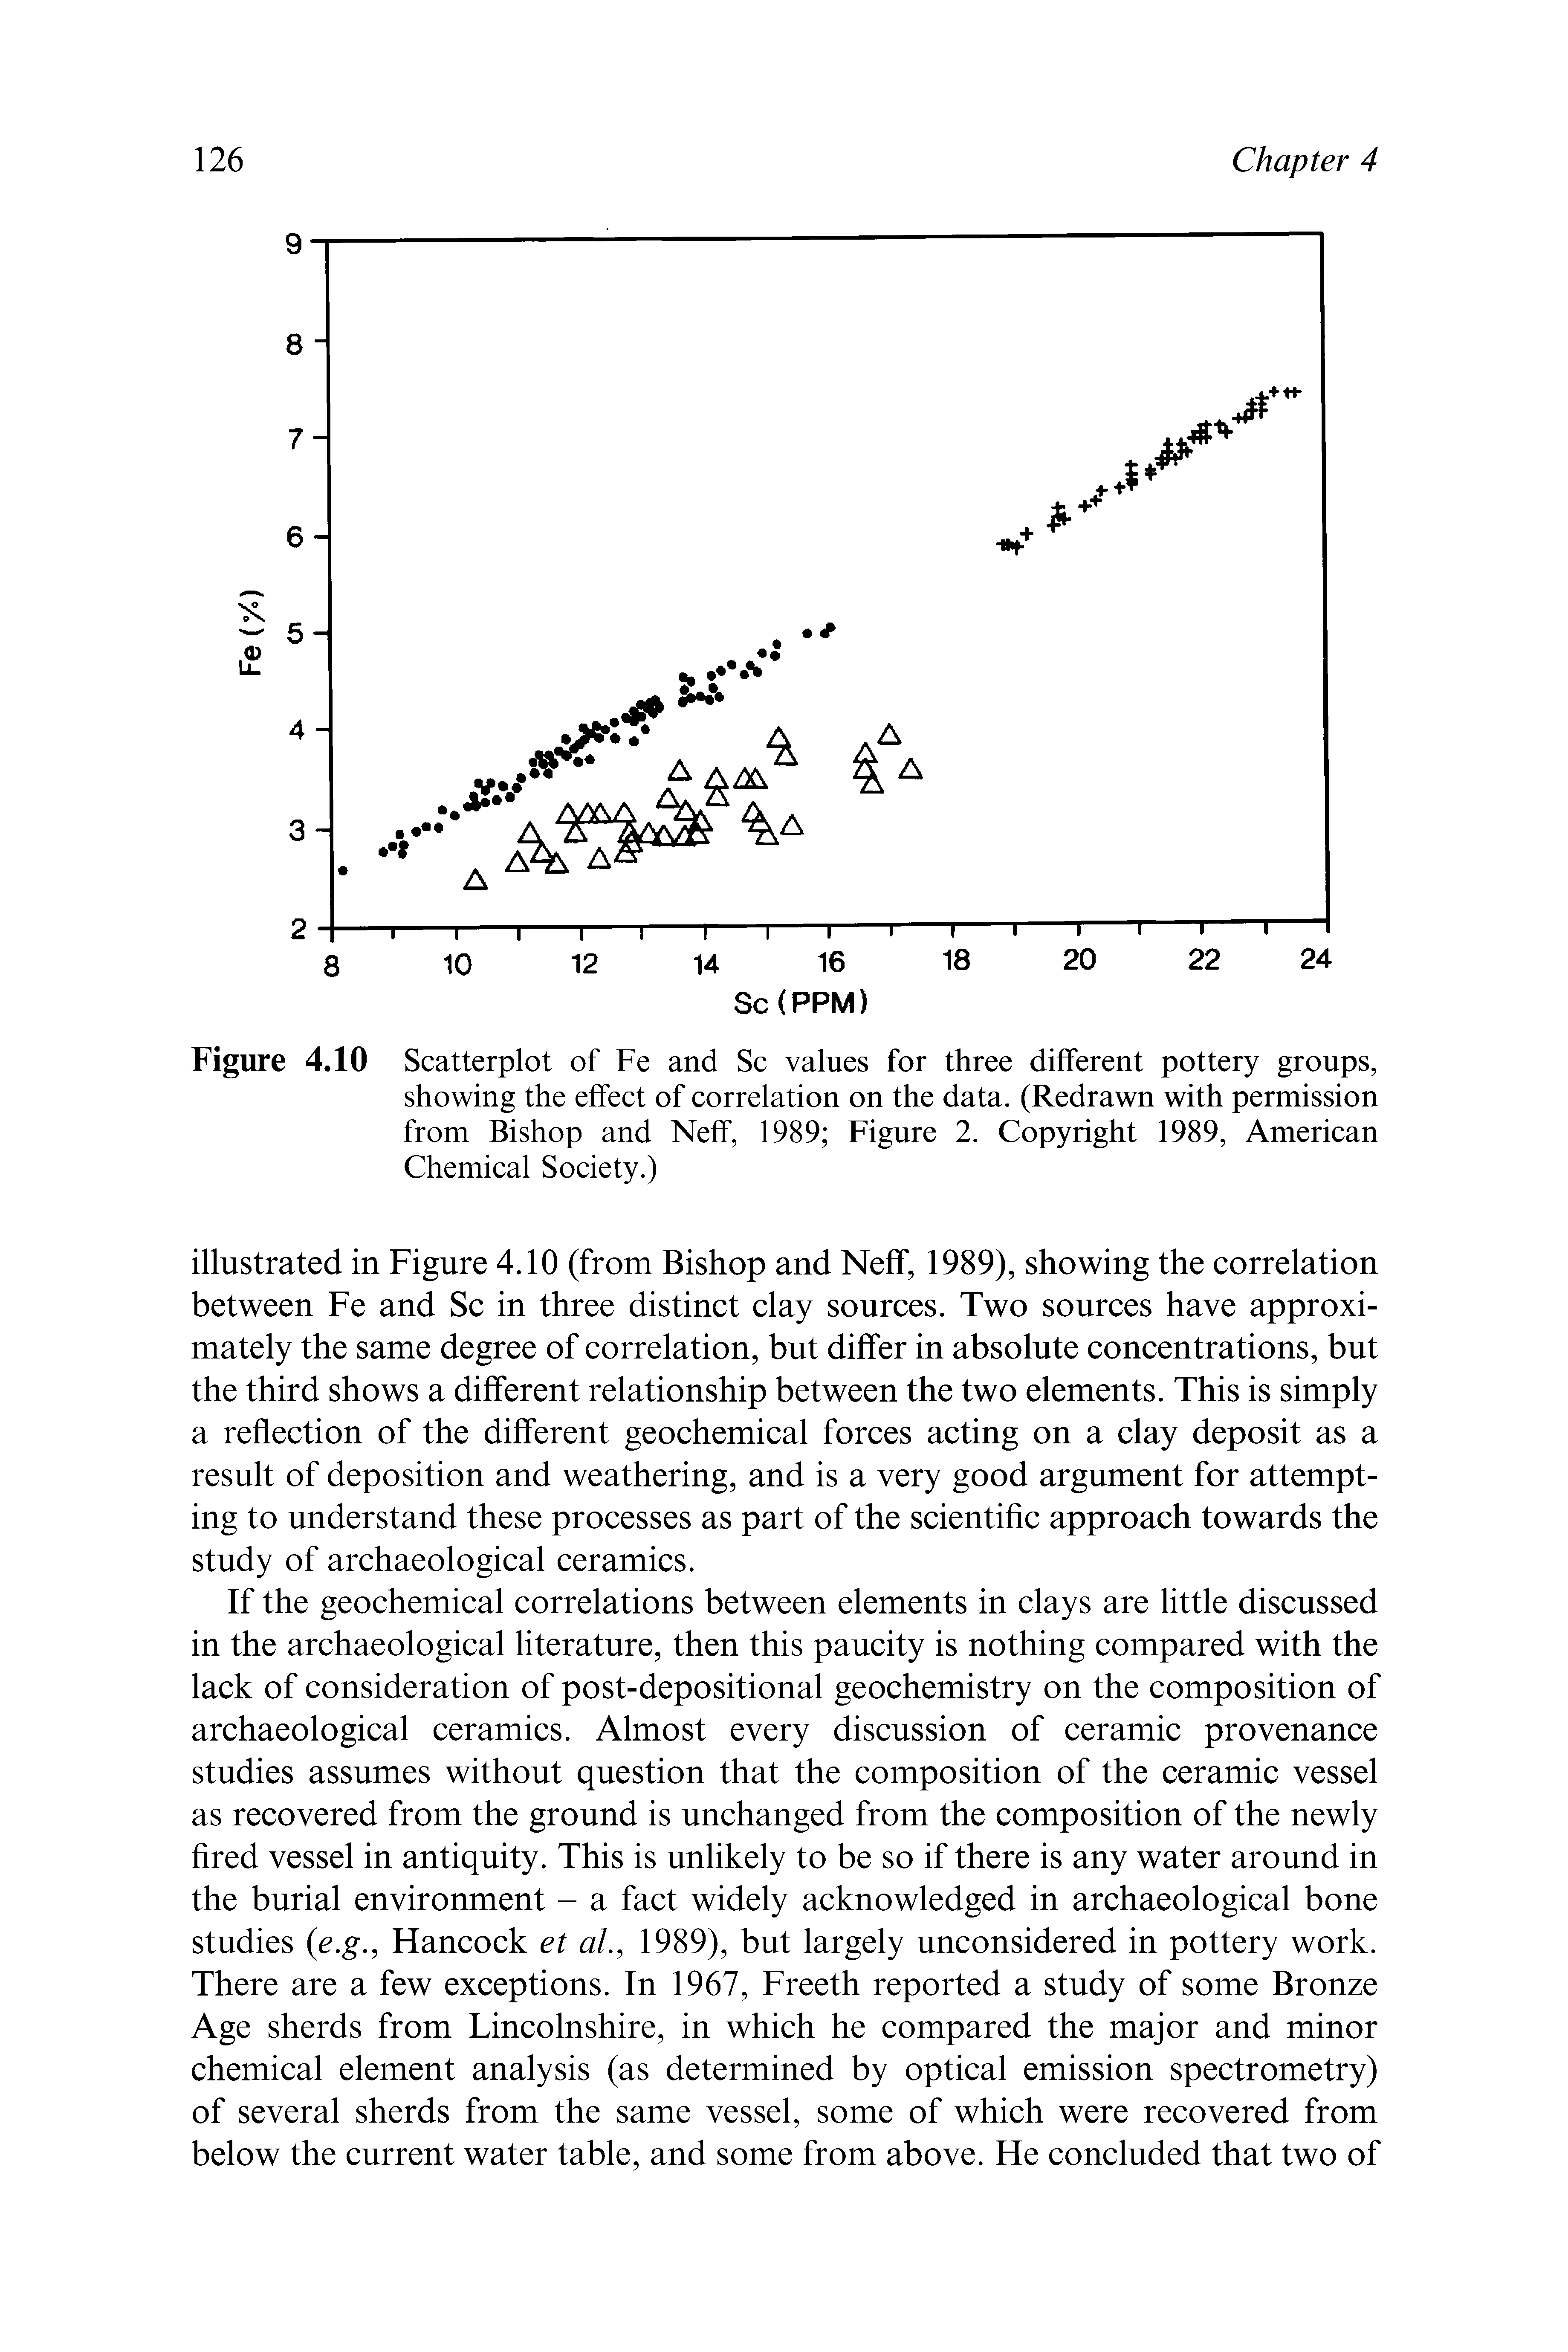 Figure 4.10 Scatterplot of Fe and Sc values for three different pottery groups, showing the effect of correlation on the data. (Redrawn with permission from Bishop and Neff, 1989 Figure 2. Copyright 1989, American Chemical Society.)...